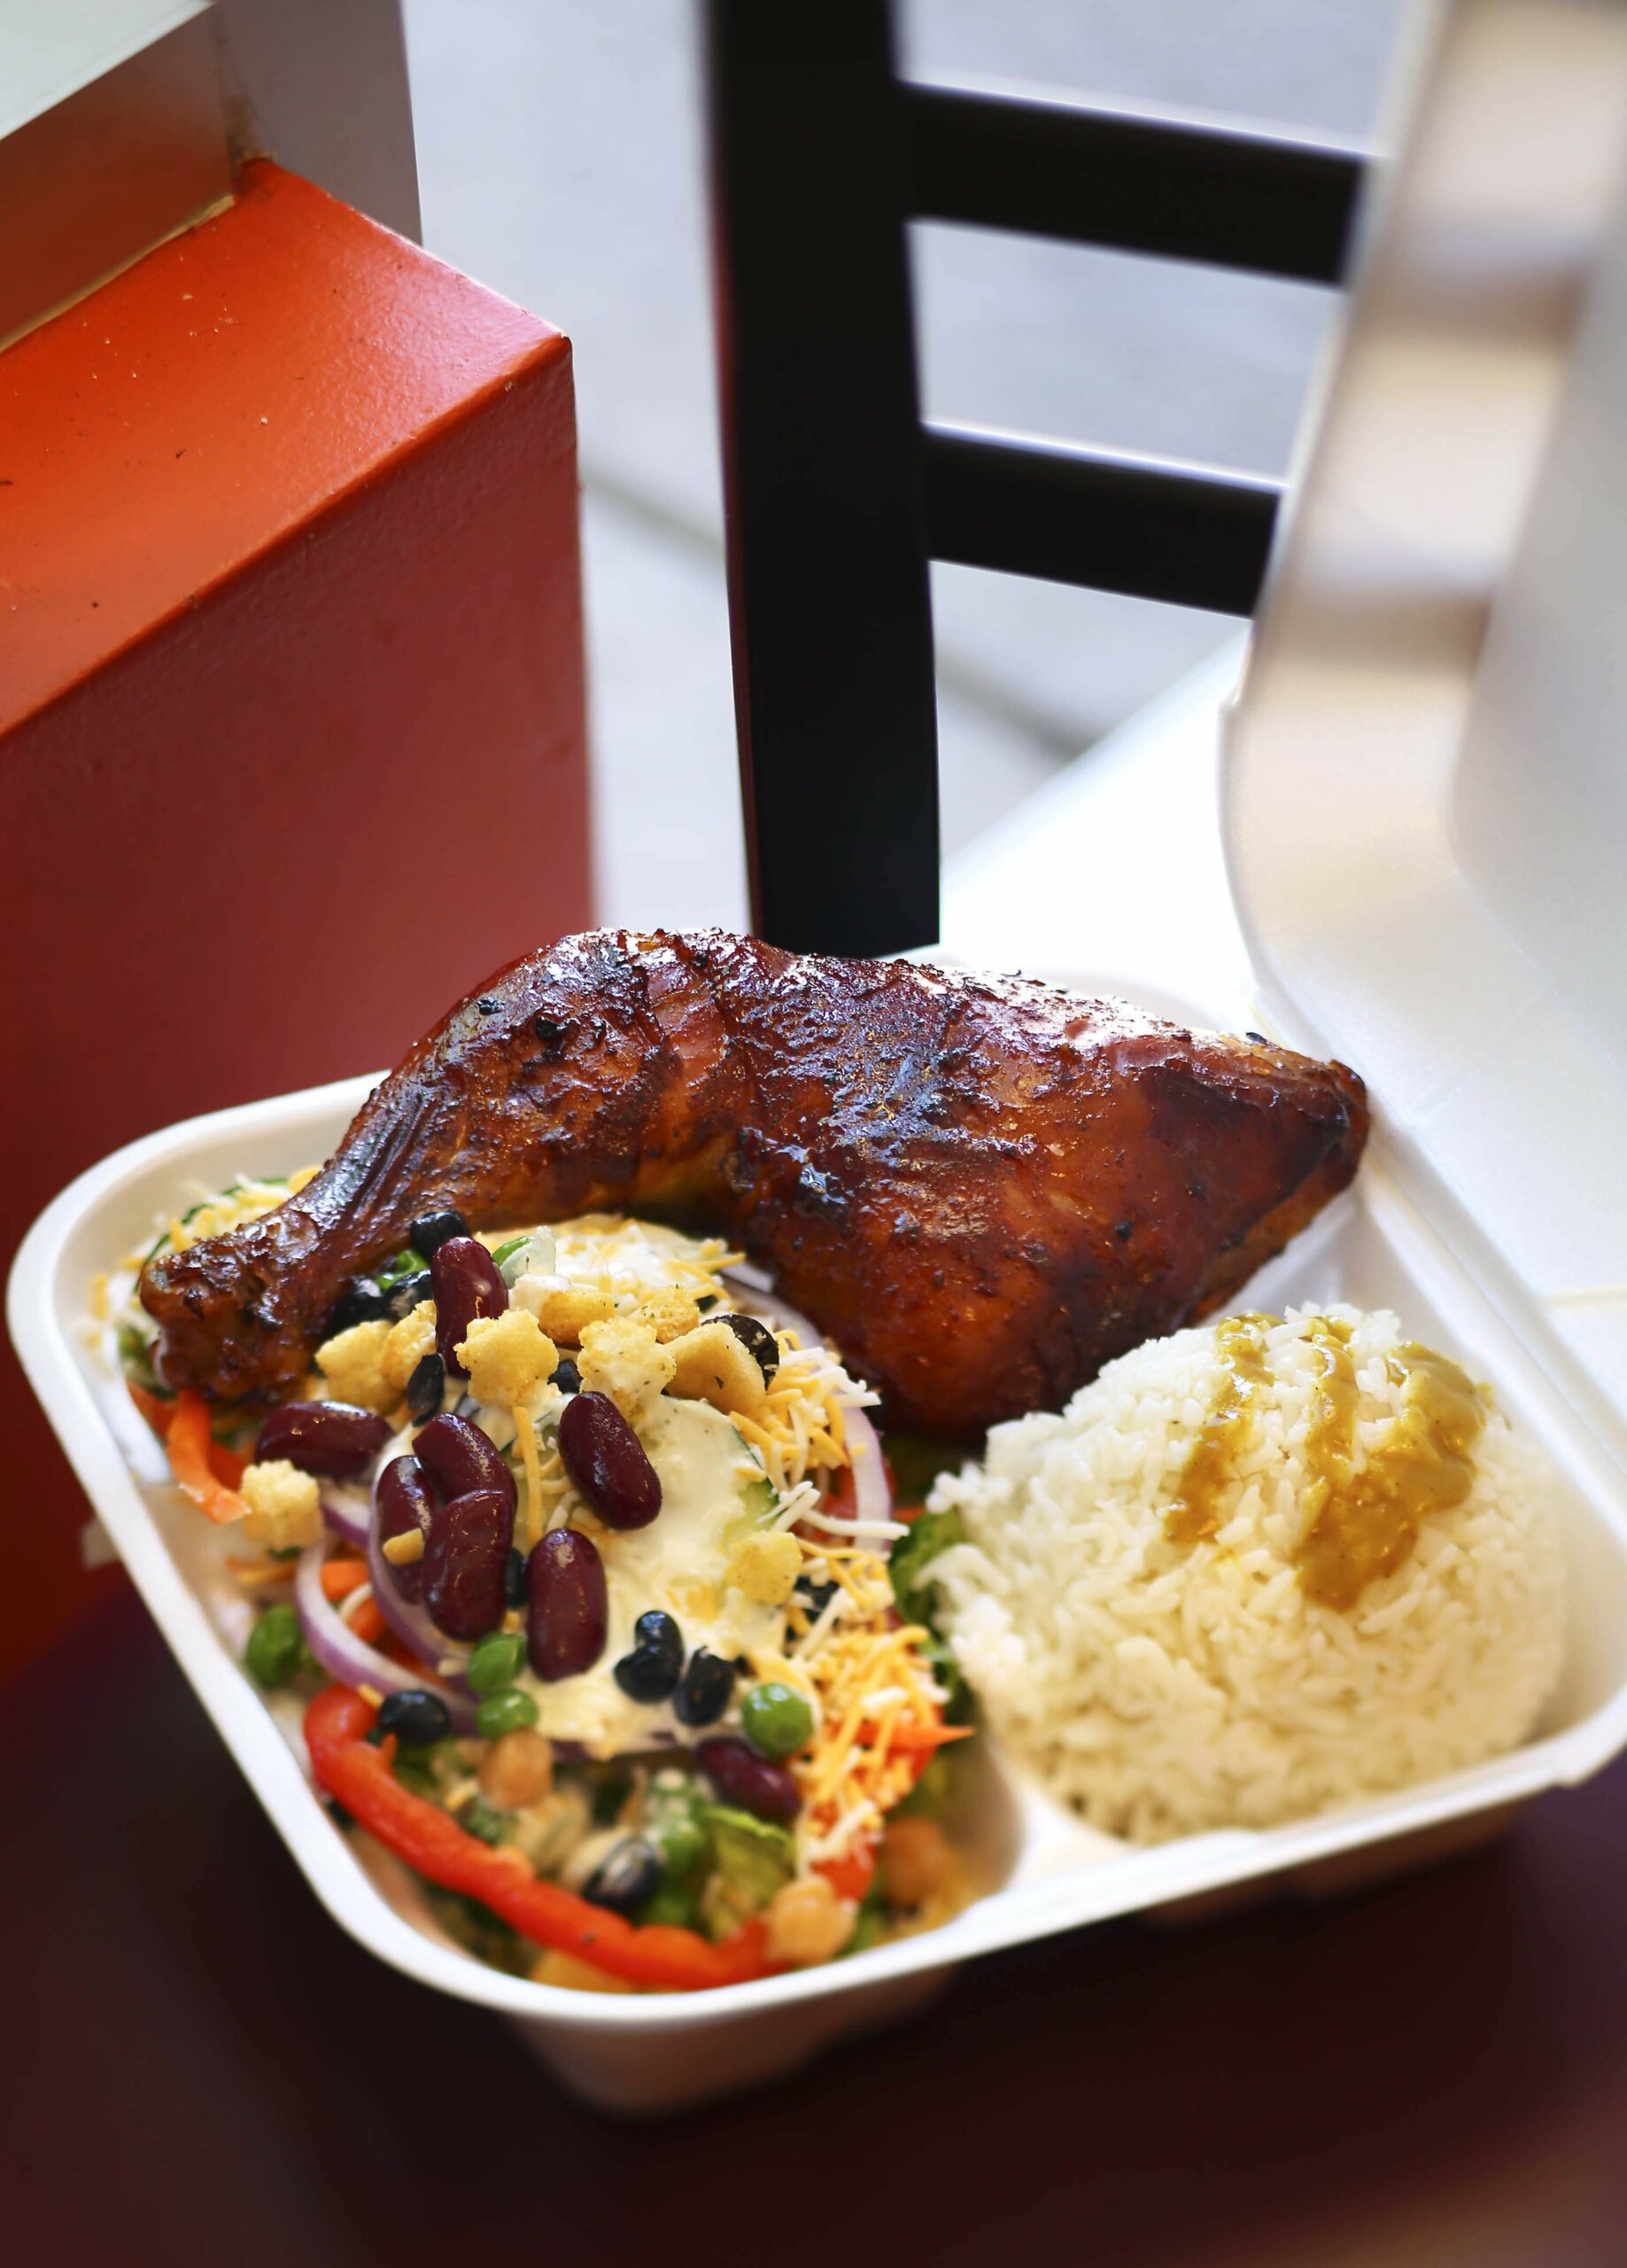 Barbecue chicken with a salad and curry rice is served for only  at Red Bee BBQ in Santa Rosa on Thursday, April 10, 2014. (Conner Jay/The Press Democrat)